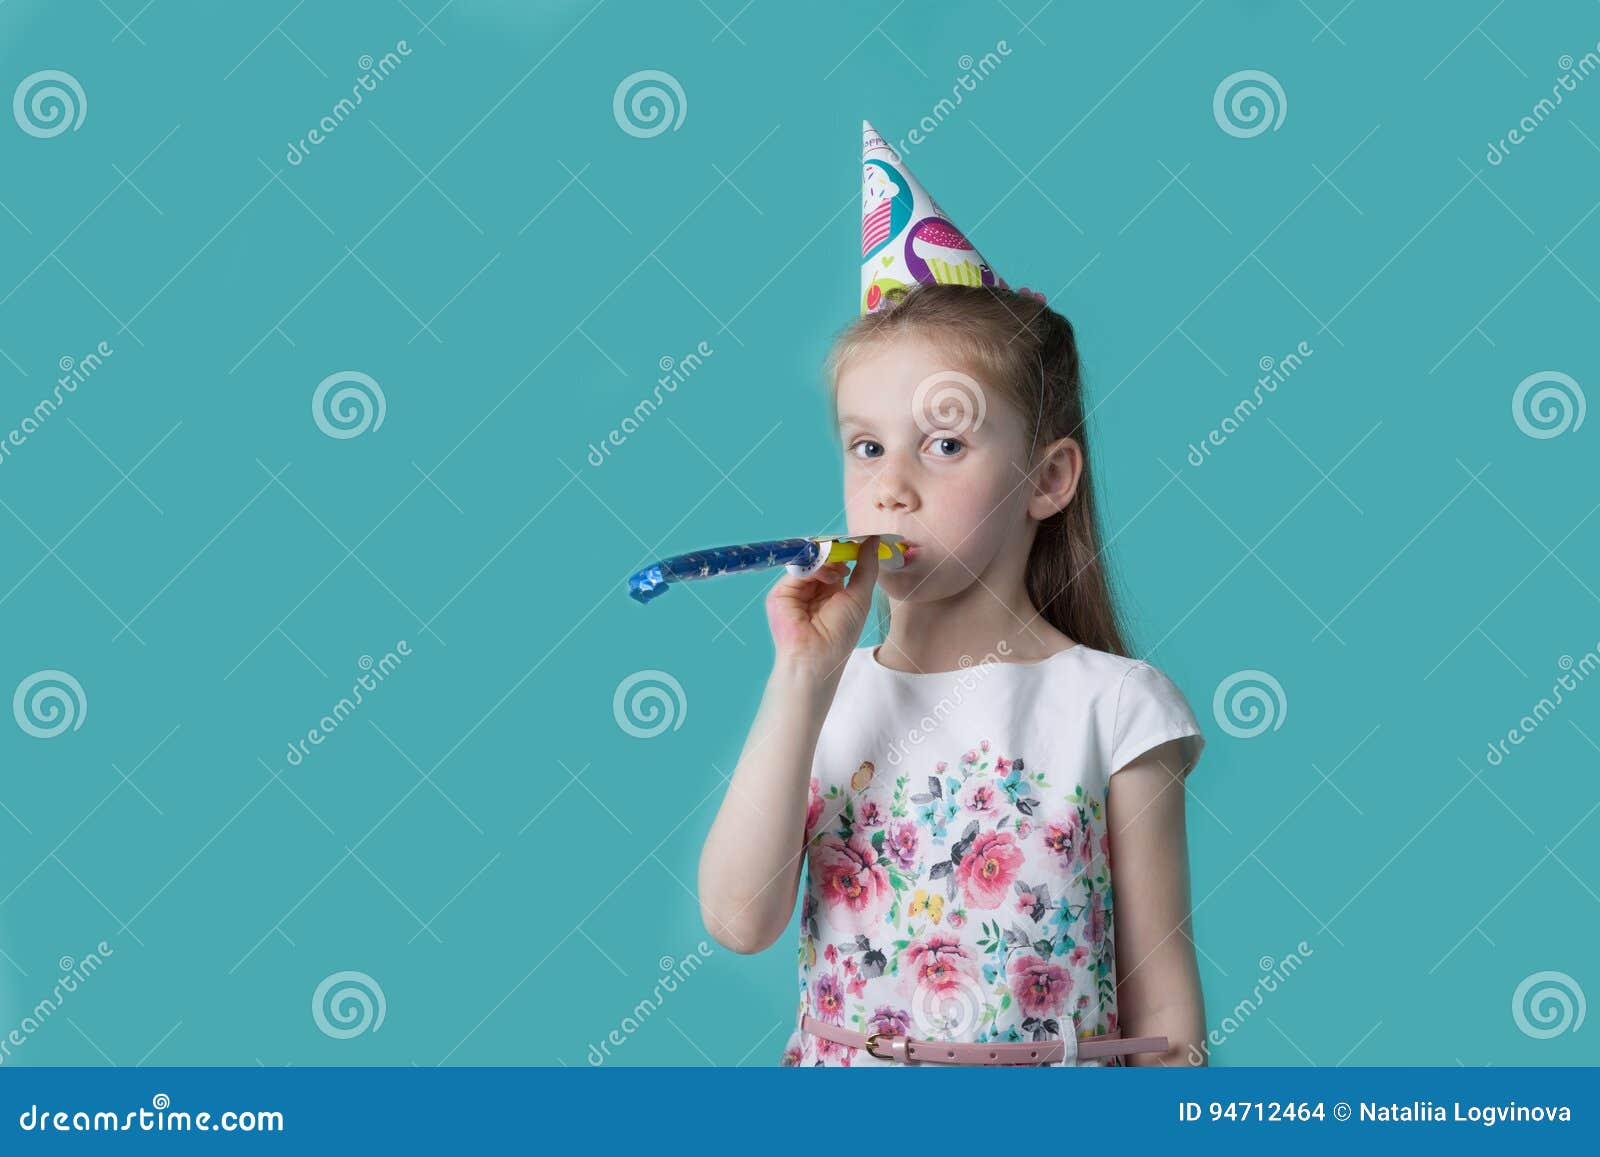 Little Girl with Party Hat on Mint Background. Birthday Girl Blowing ...